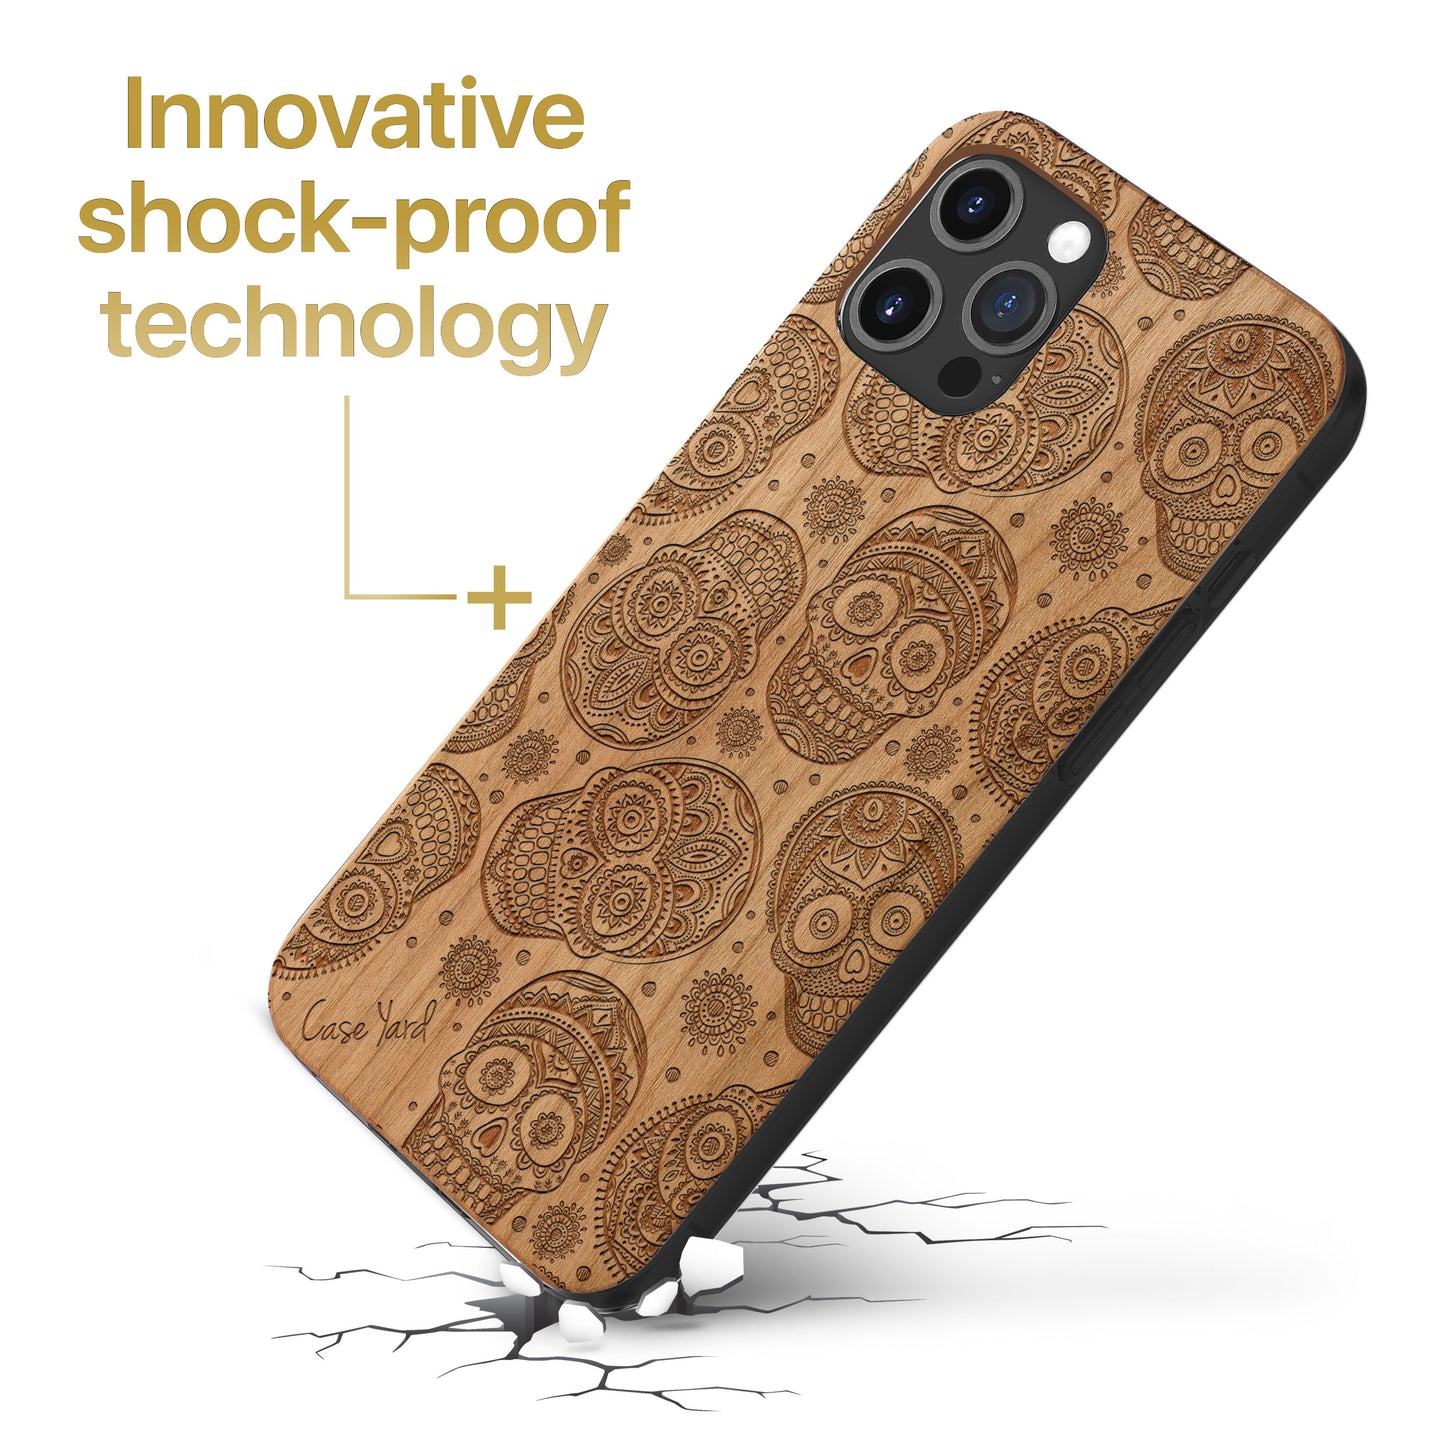 Wooden Cell Phone Case Cover, Laser Engraved case for iPhone & Samsung phone Skull Pattern Design